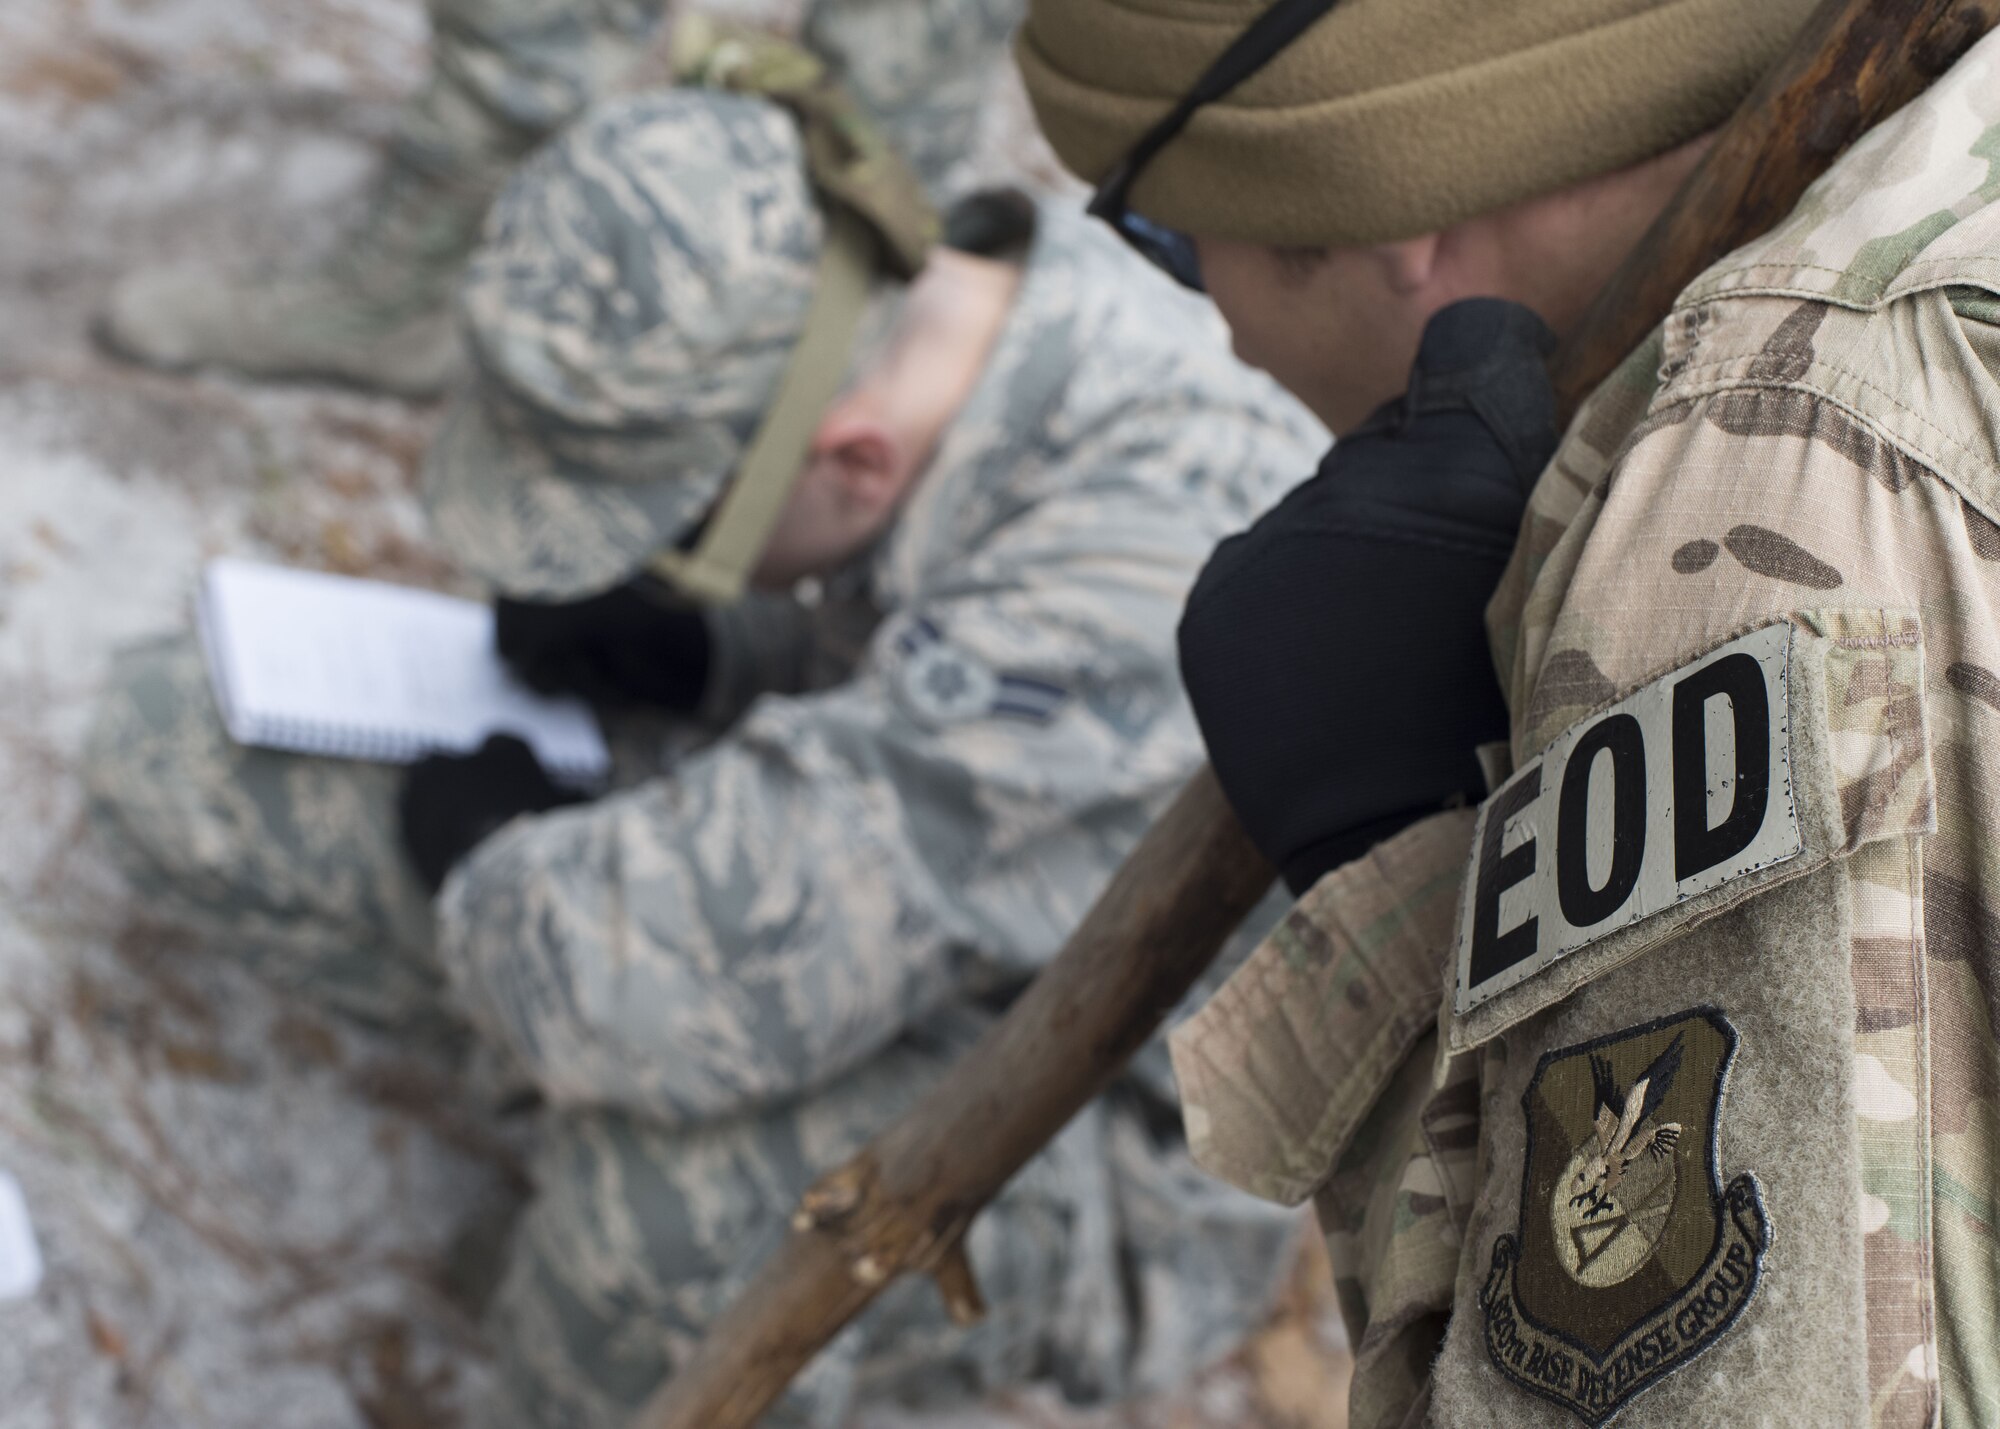 An explosive ordnance disposal technician from the 820th Combat Operations Squadron reviews nine-line notes taken during counter-improvised explosive device training, Jan. 24, 2018, at Moody Air Force Base, Ga. The 820th Base Defense Group defenders trained on how to detect IEDs and counter measures to take when one is found. IEDs have become one of the most common forms of attack in the Middle East since 2003. (U.S. Air Force photos by Staff Sgt. Eric Summers Jr.)